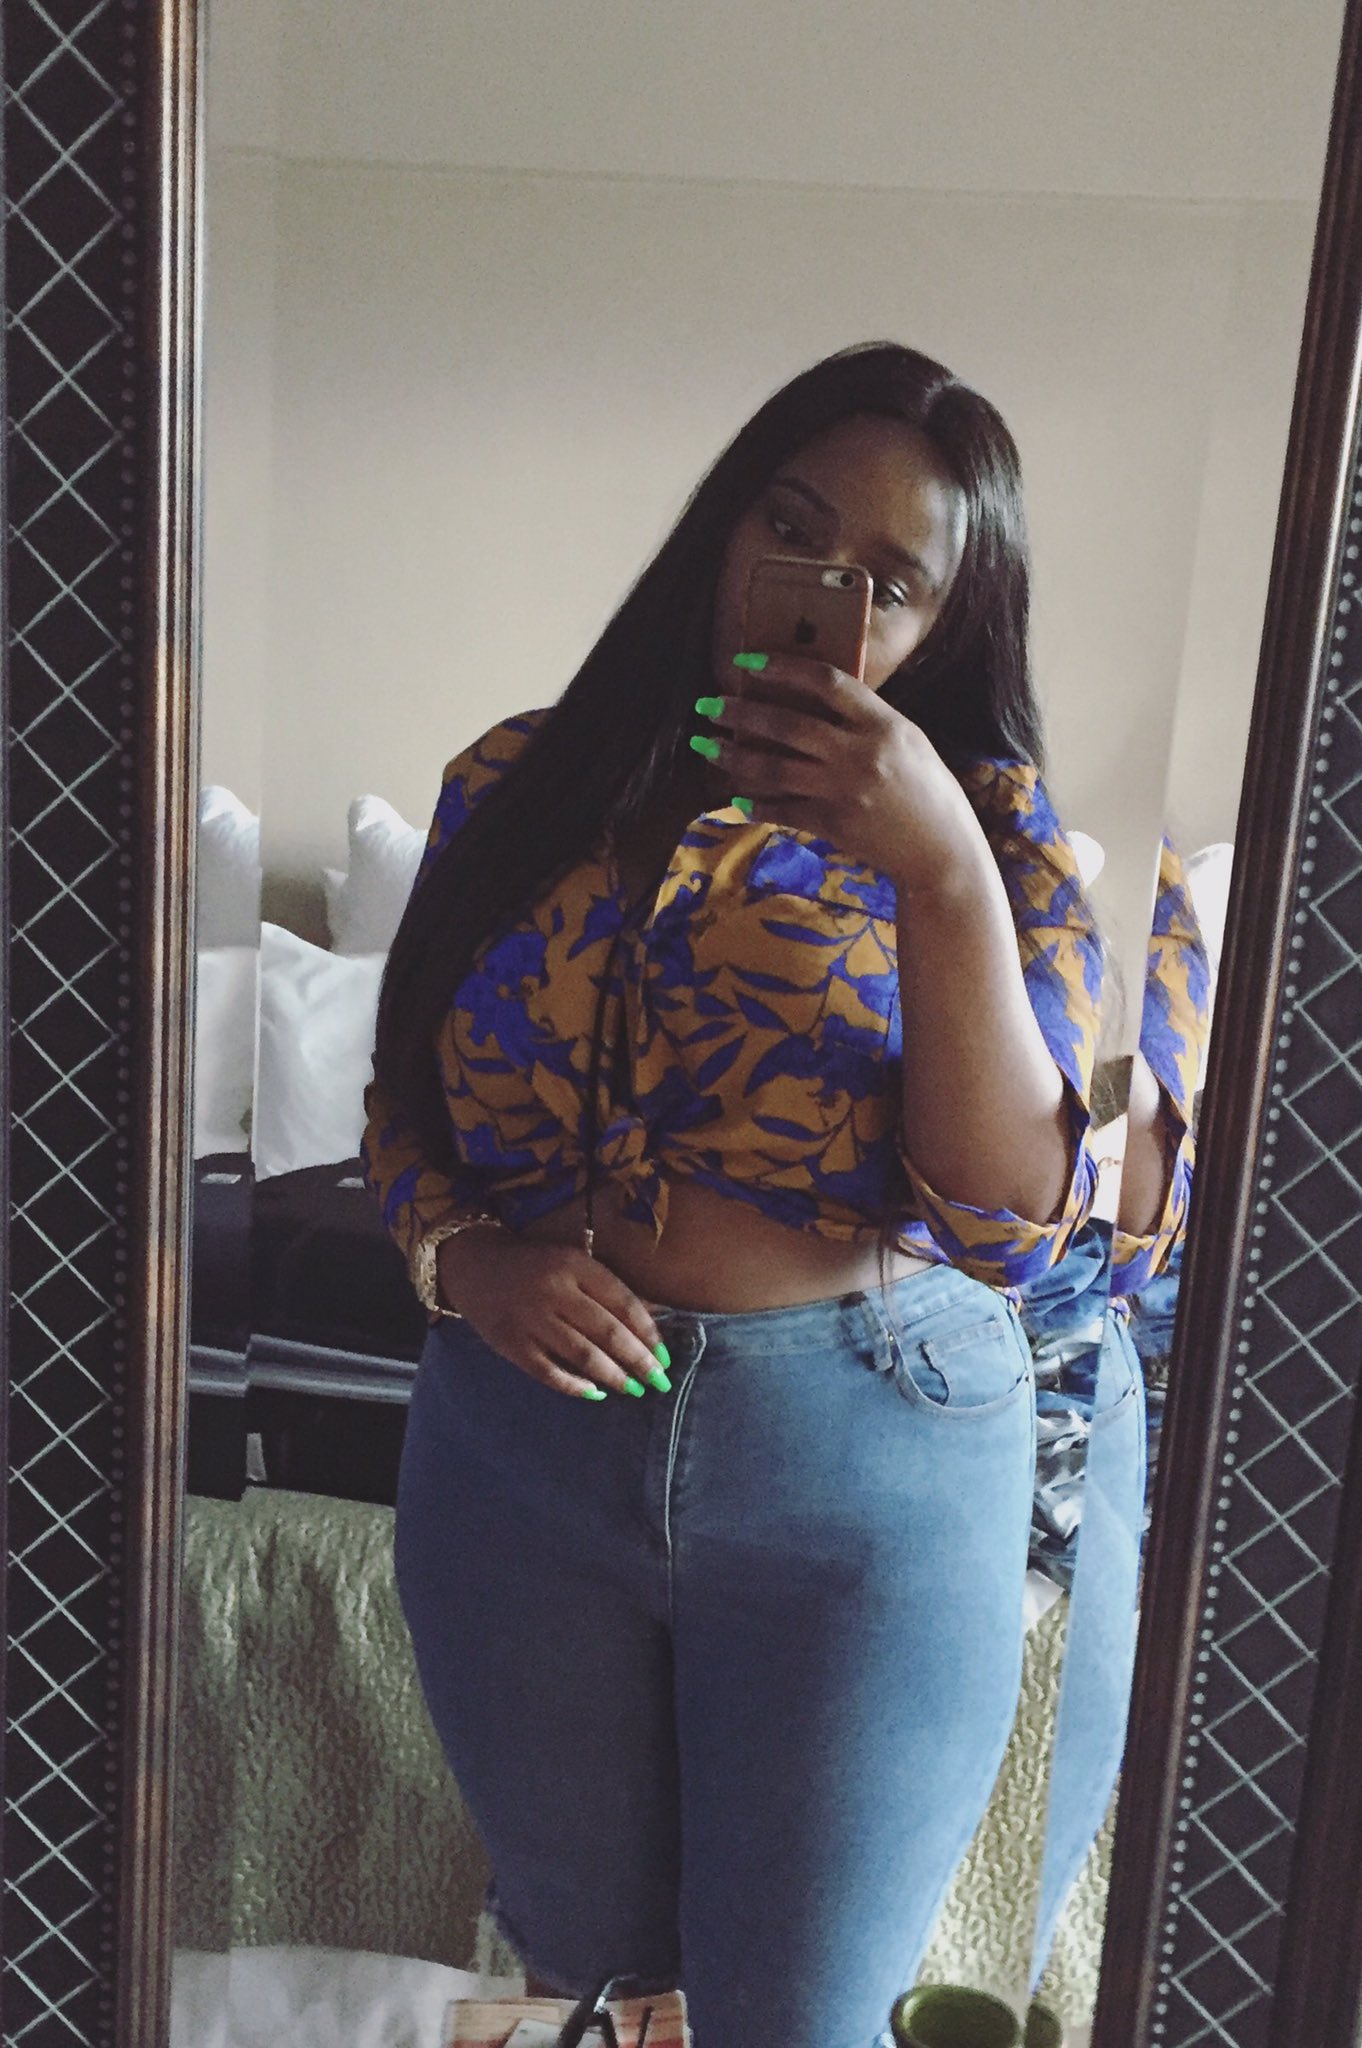 thickleeyonce ಮೇಲೆ X: Fat girls should not wear crop tops or show their  bellies Me:  / X